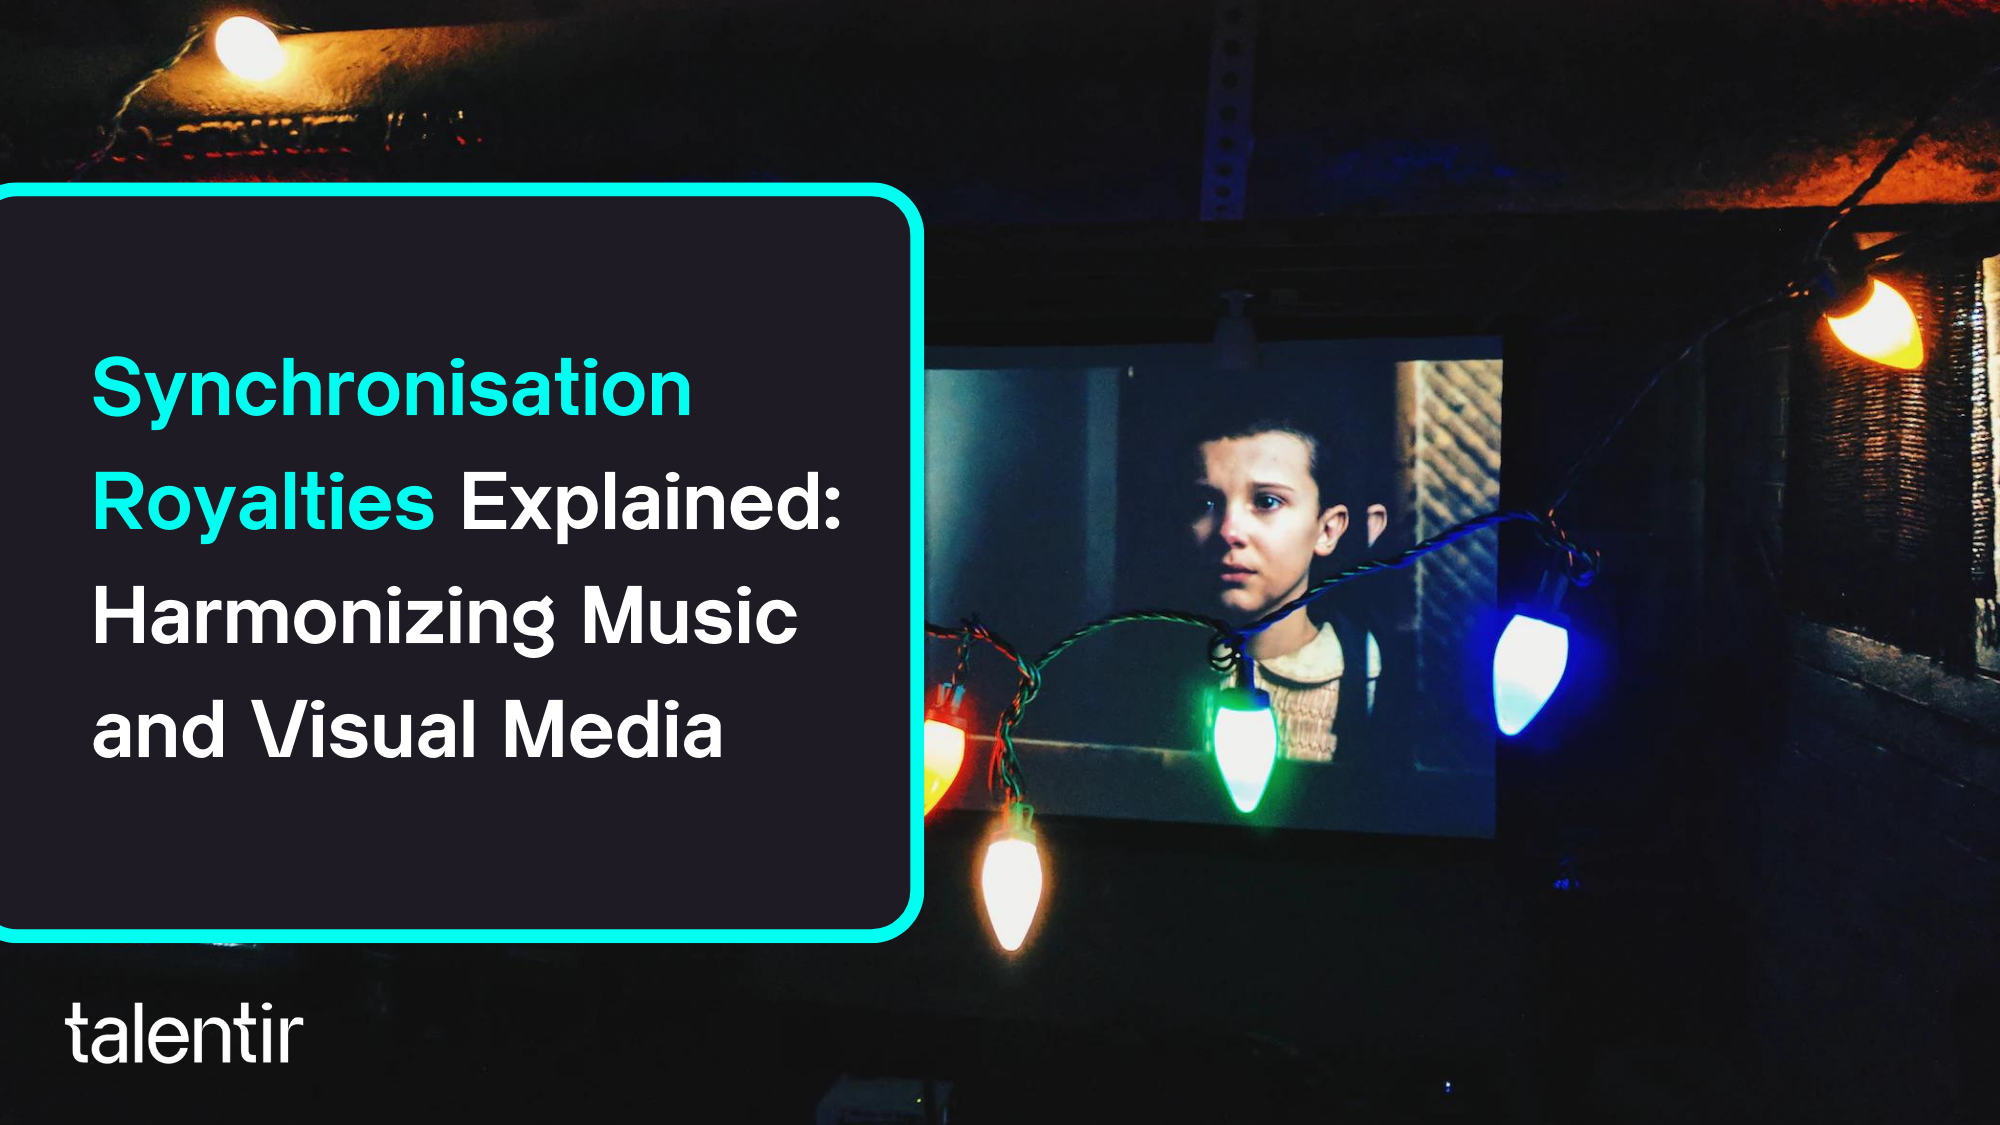 In this article, we dive into synchronization royalties and all the background work enabling artists to earn from their music in movies, TV, games, ads, etc.